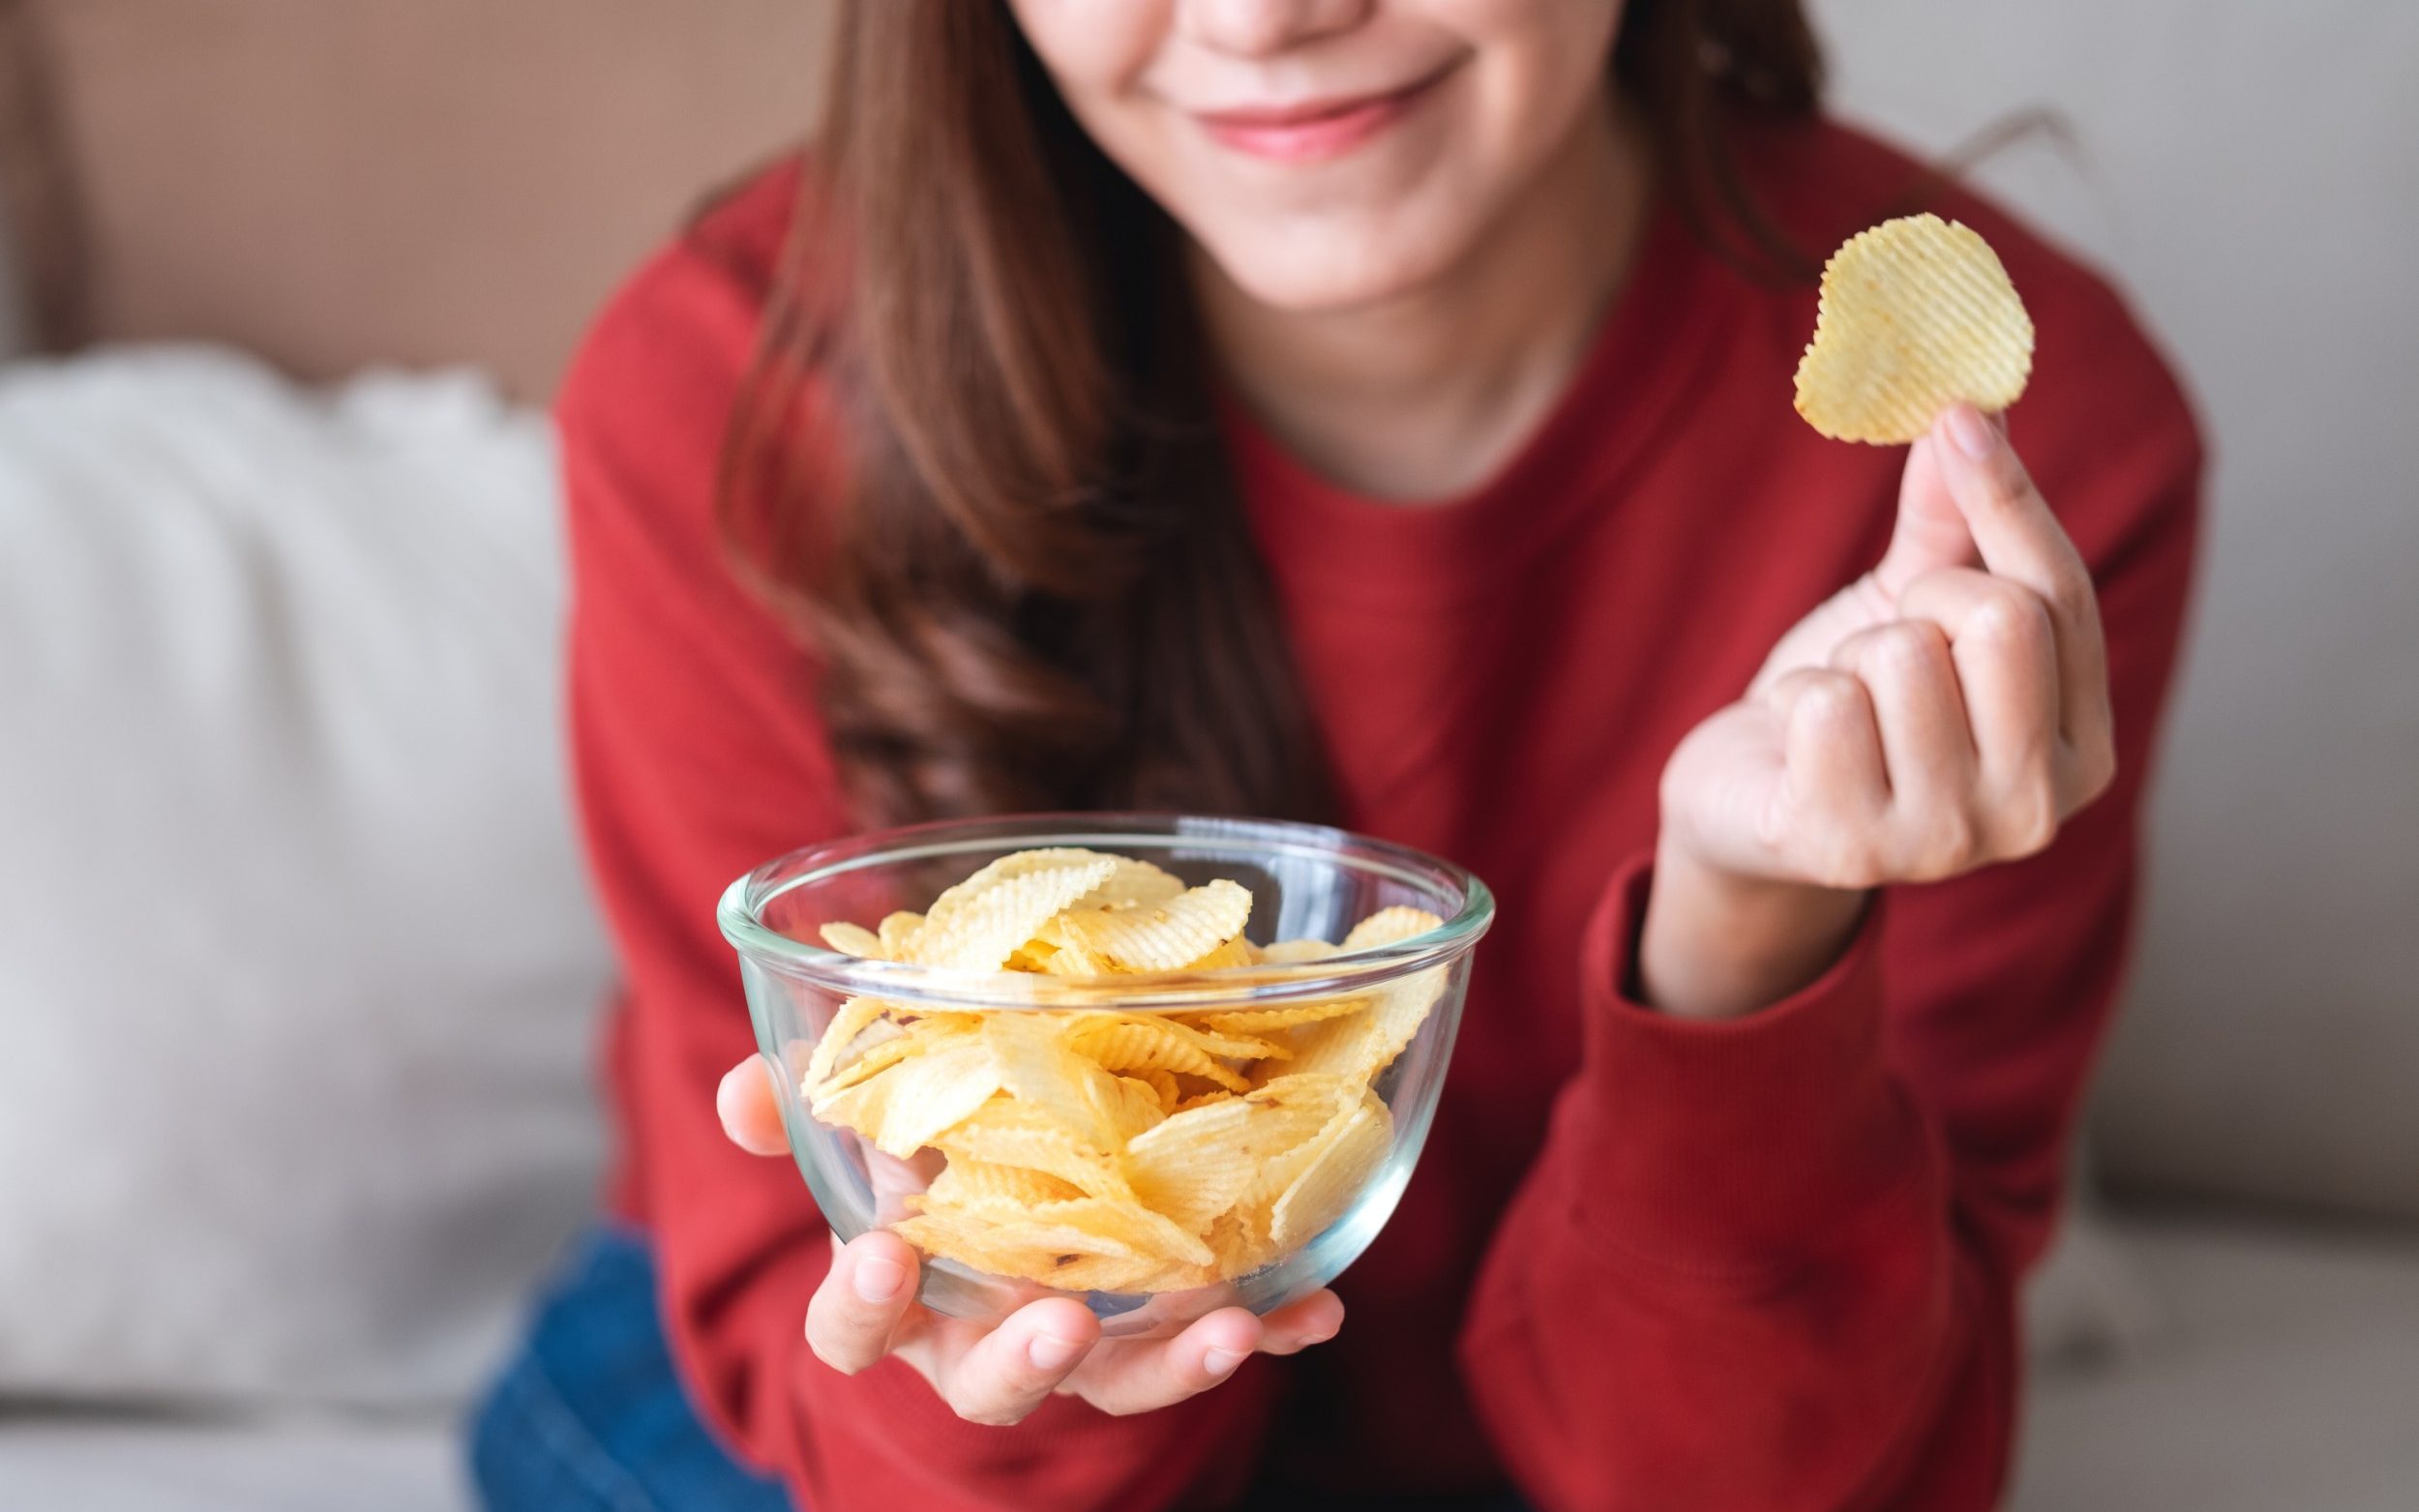 how-to-eat-chips-in-front-of-people